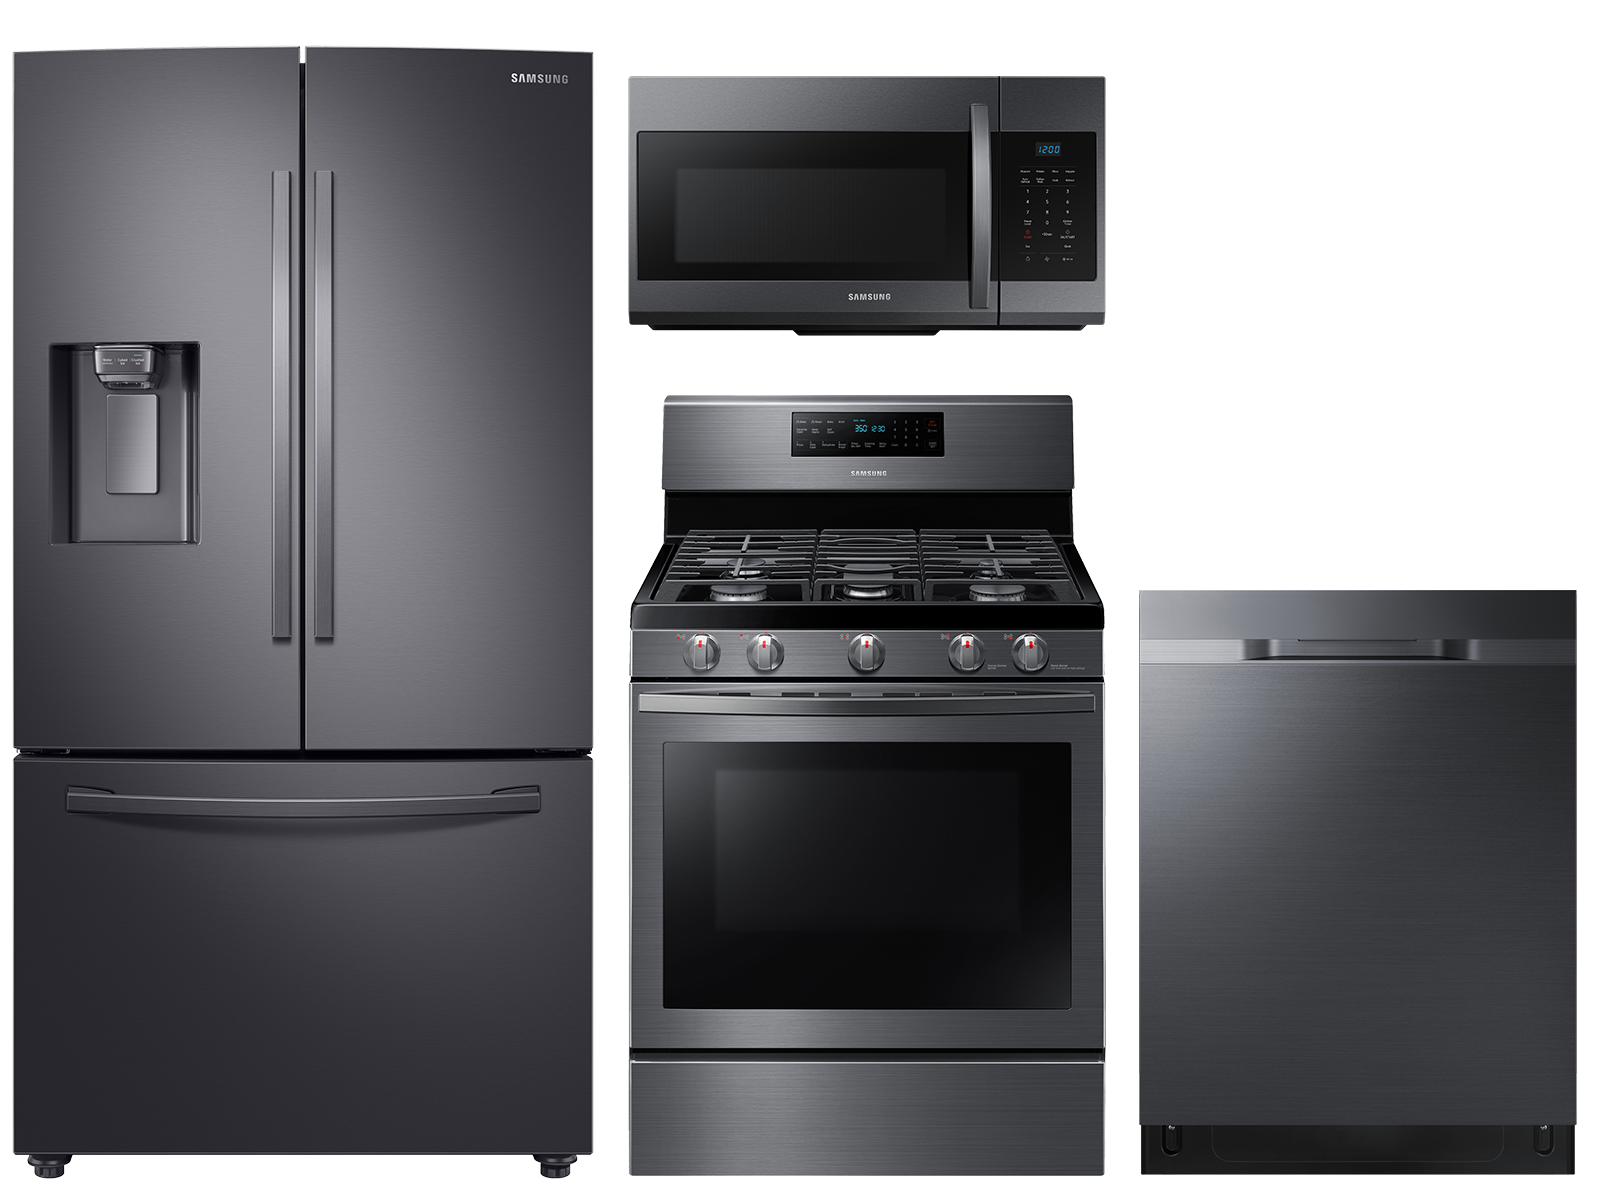 Samsung Large Capacity 3-door Refrigerator + Gas Range with Convection + StormWash™ Dishwasher + Microwave in Black Stainless(BNDL-1646291344933)